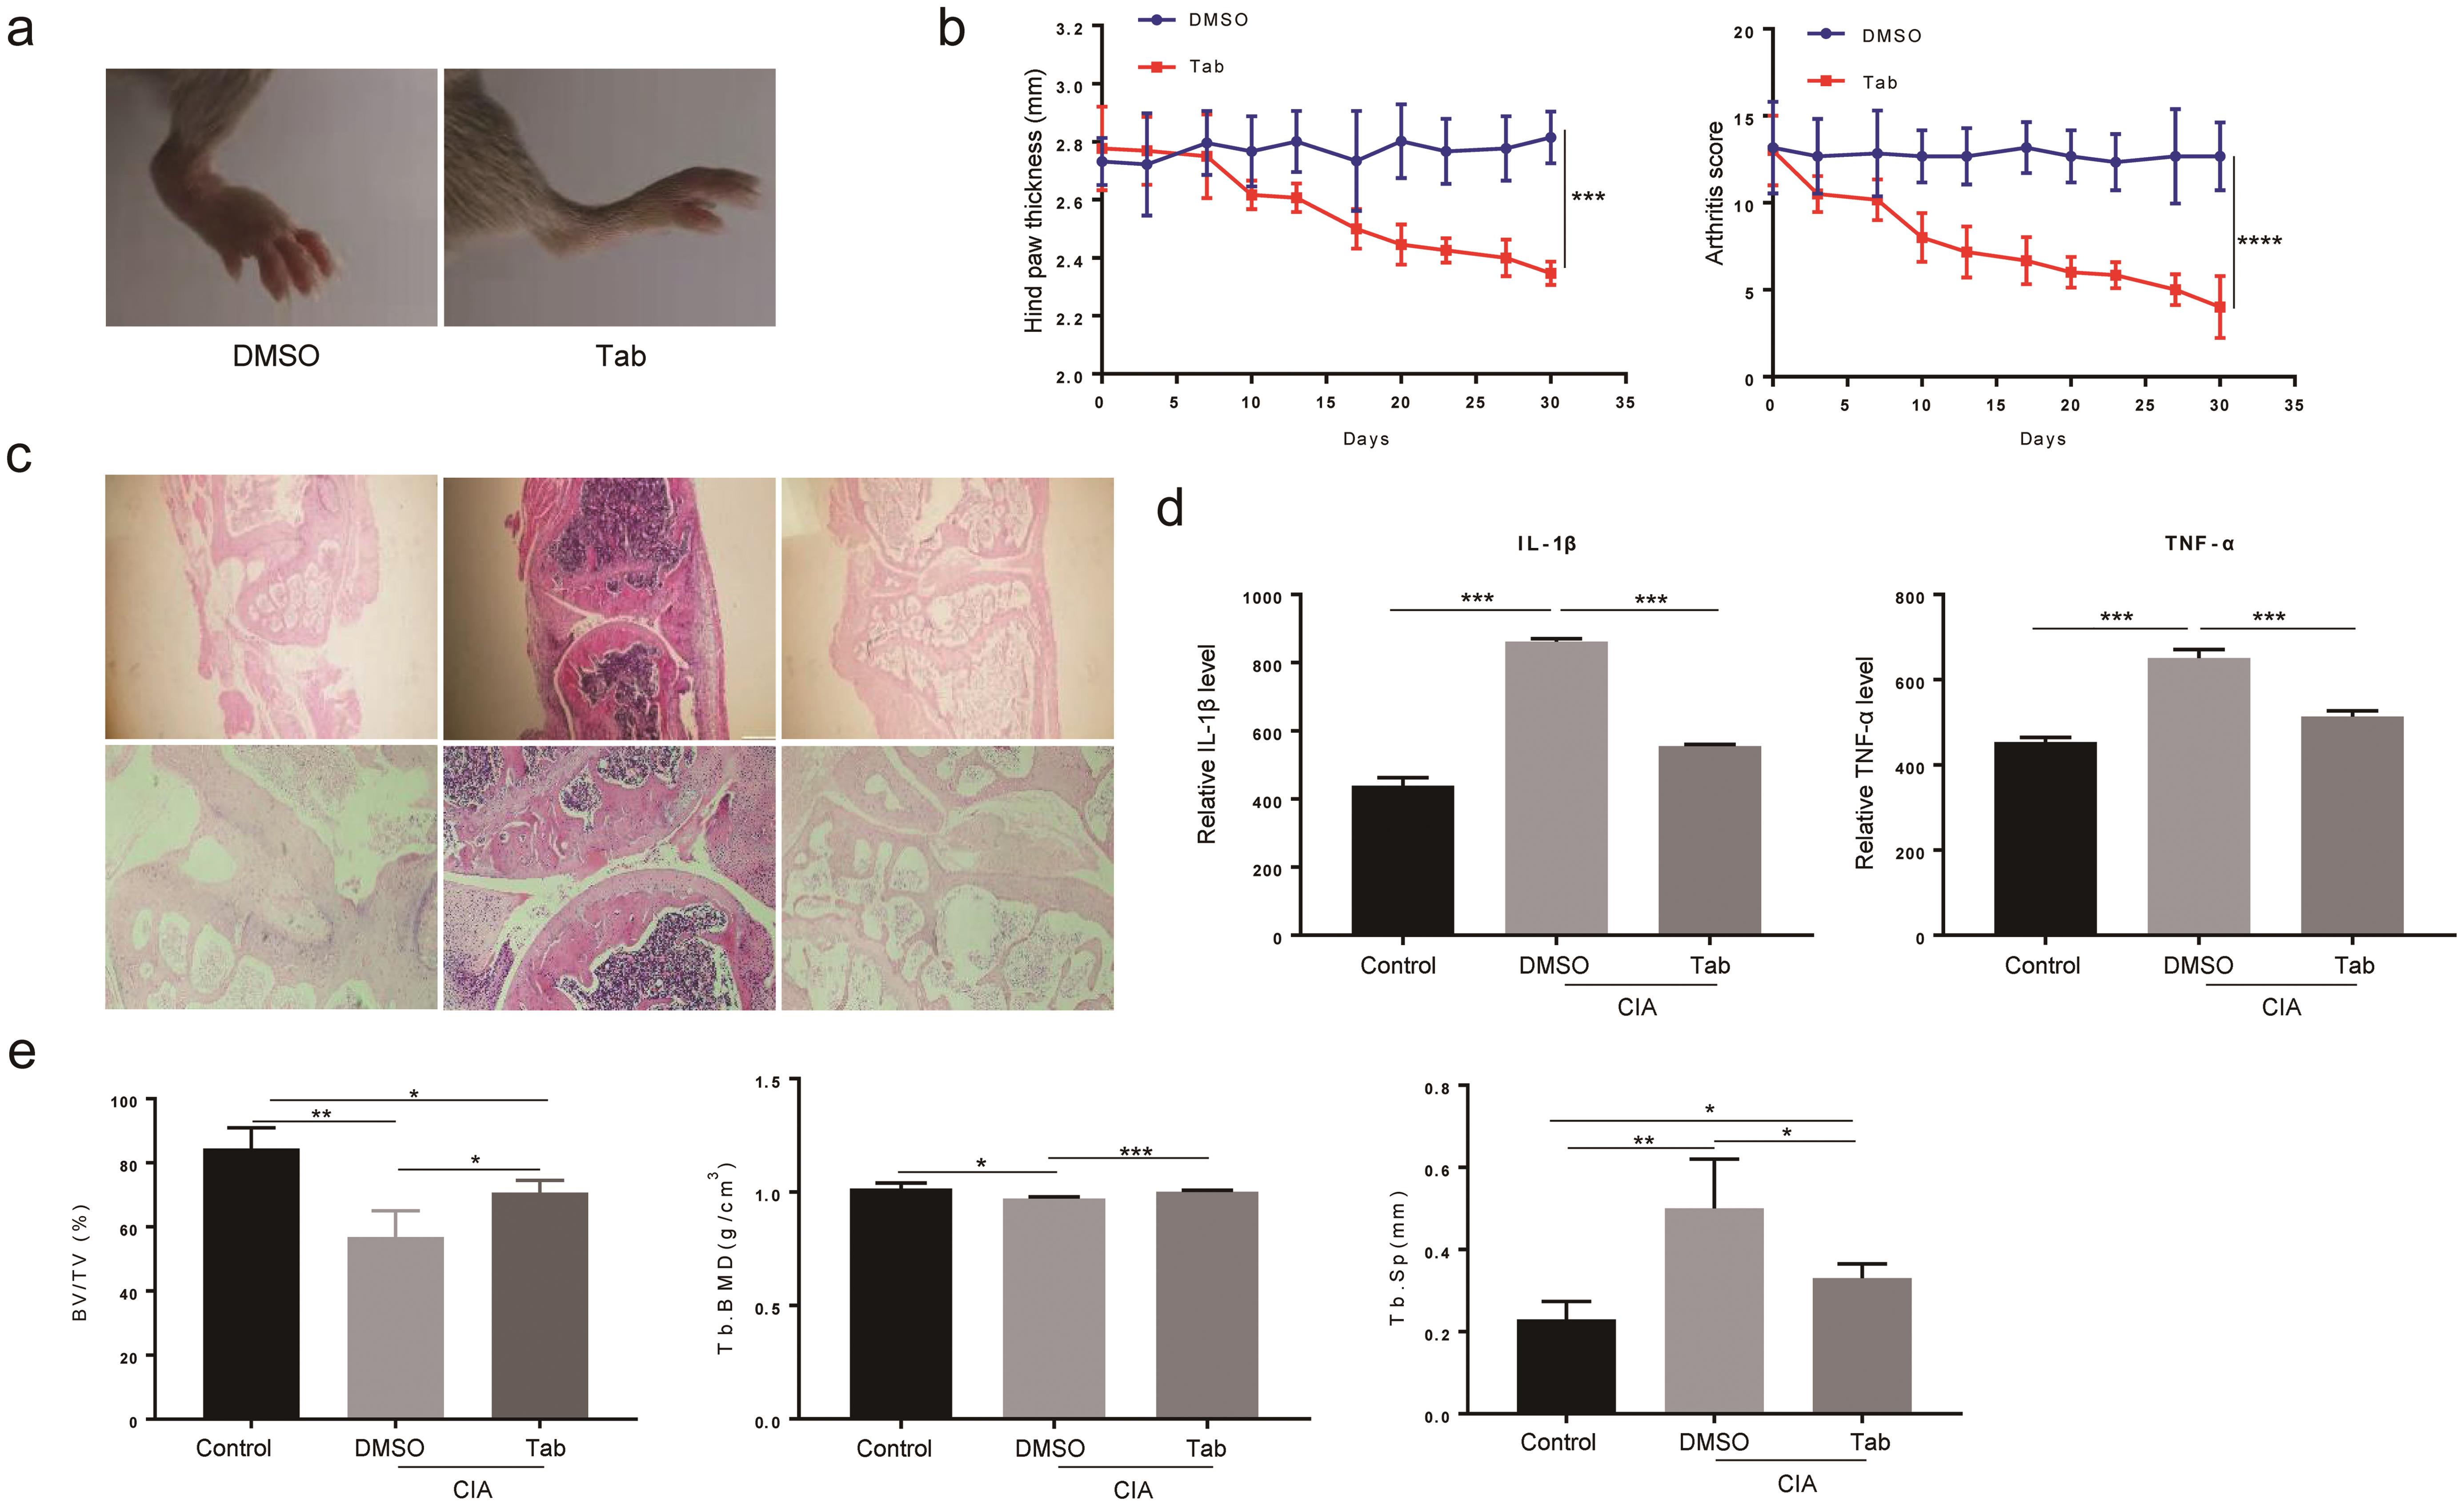 The effects of Tab on the disease progression in CIA mice.